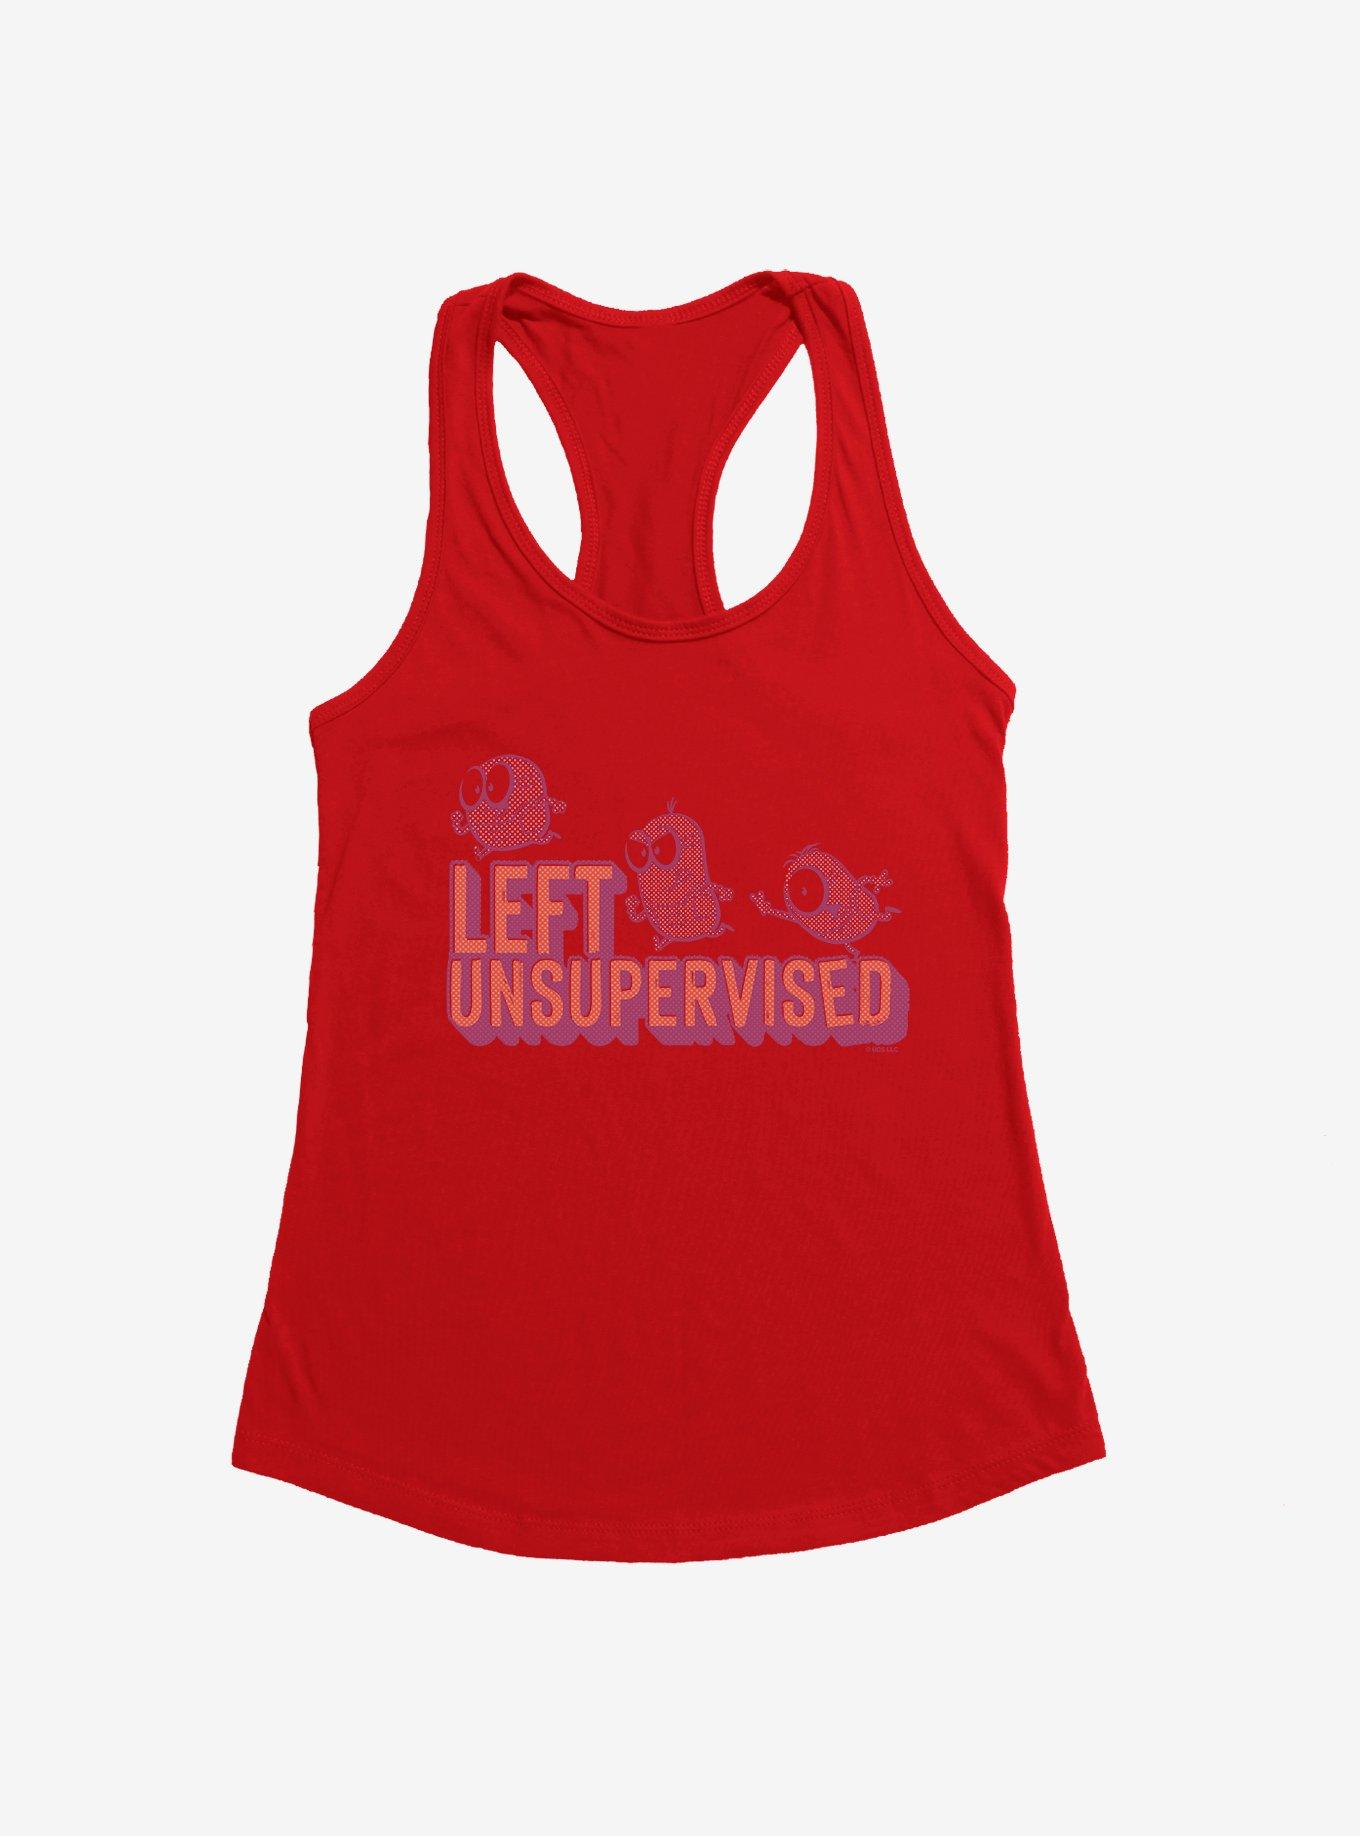 Minions Spotty Left Unsupervised Girls Tank, RED, hi-res